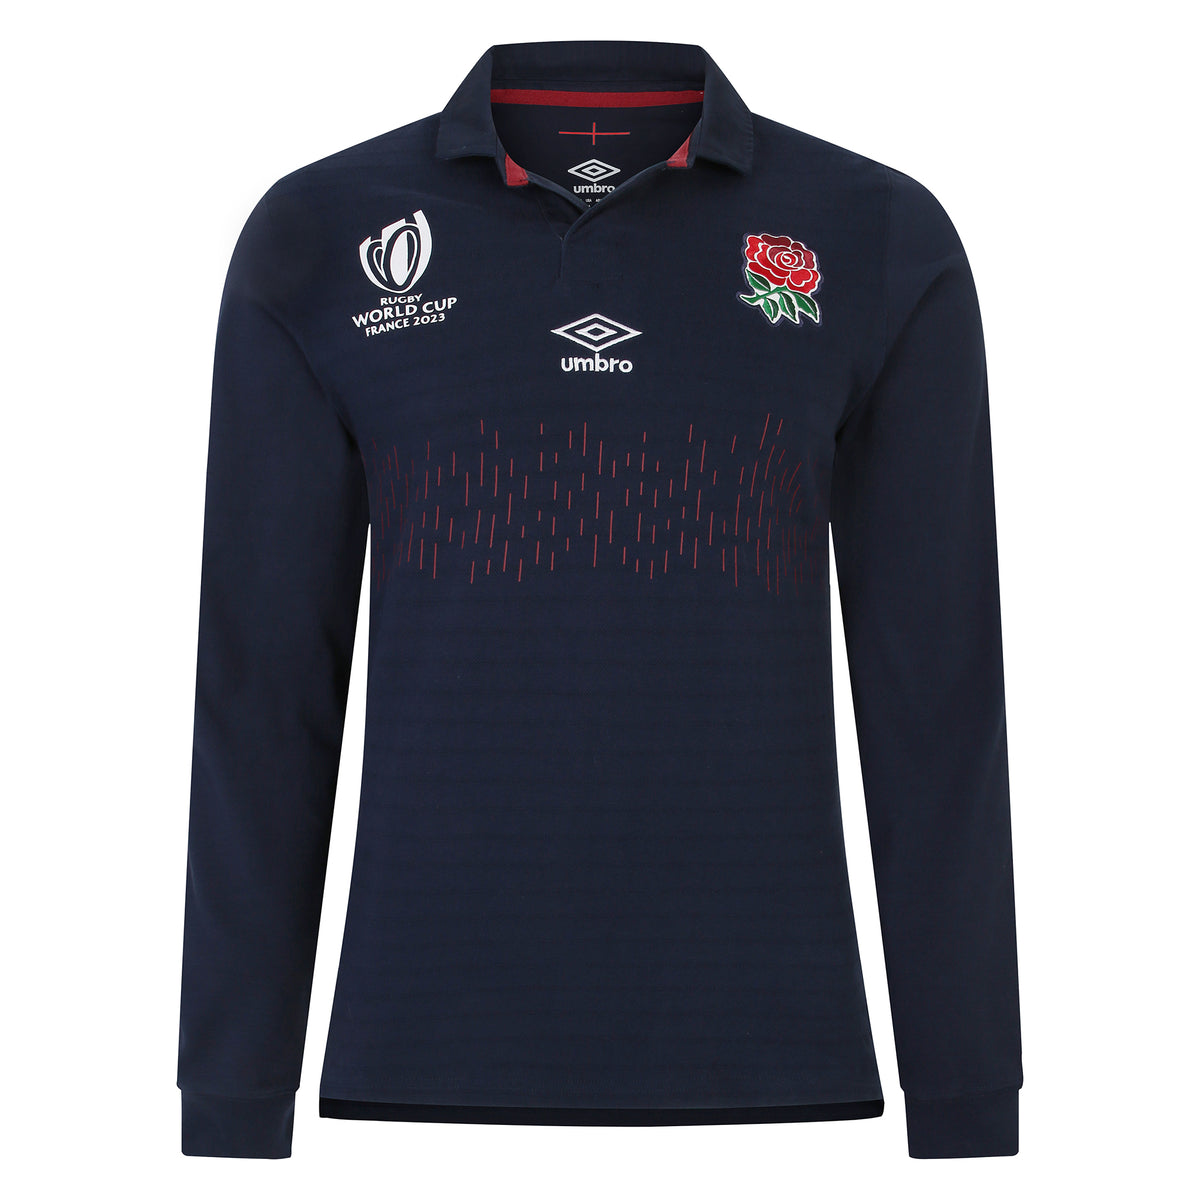 Umbro England Rugby World Cup Alternate Classic Jersey Replica Long Sleeve